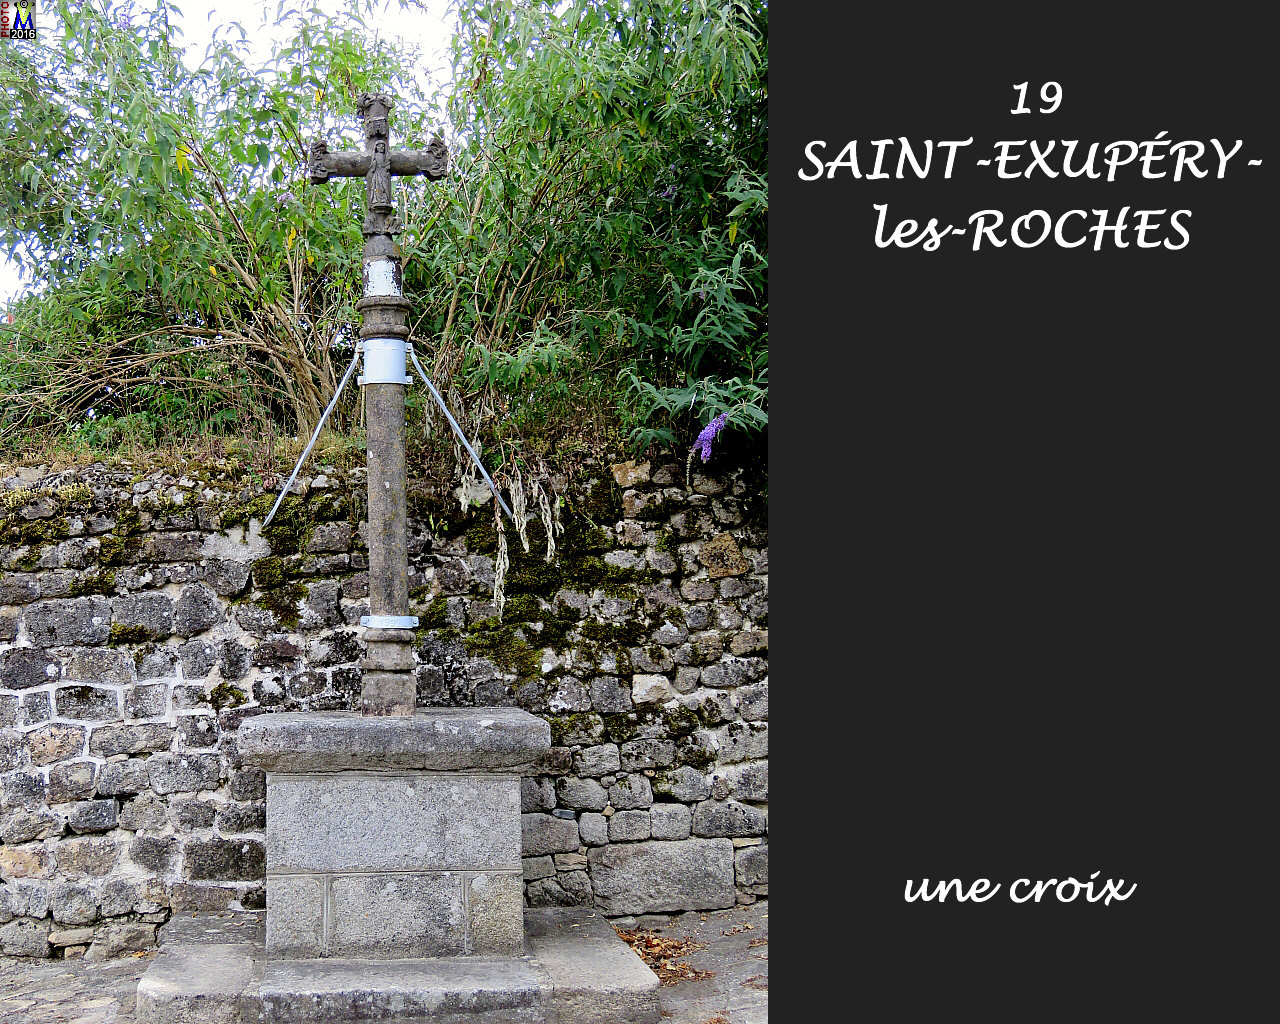 19ST-EXUPERY-ROCHES_croix_100.jpg